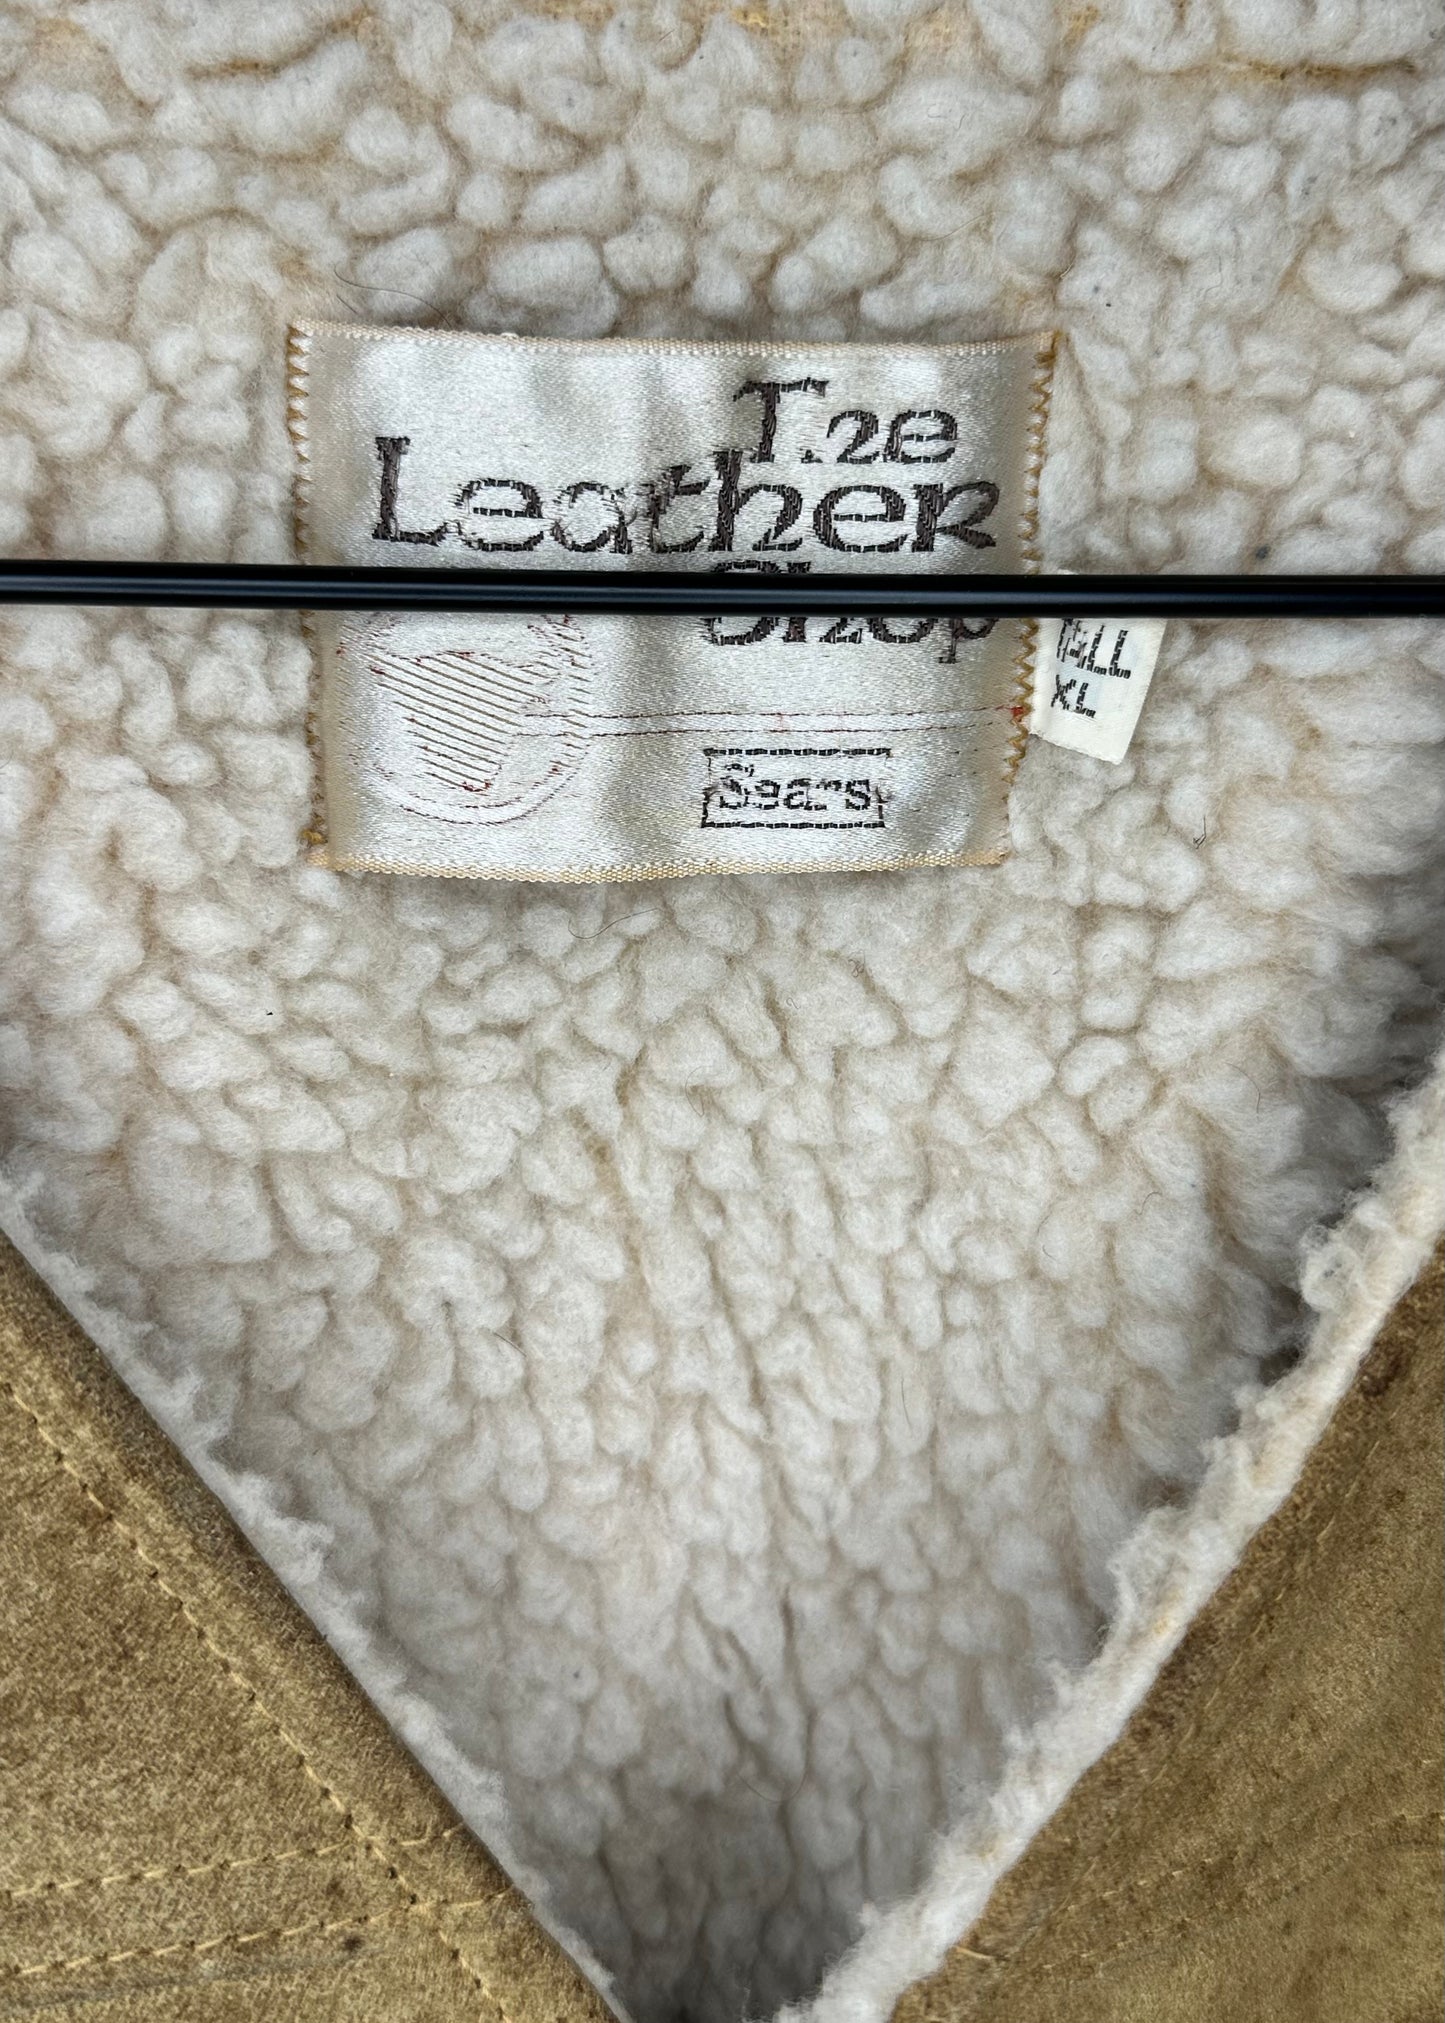 Leather and Wool Vest from Sears